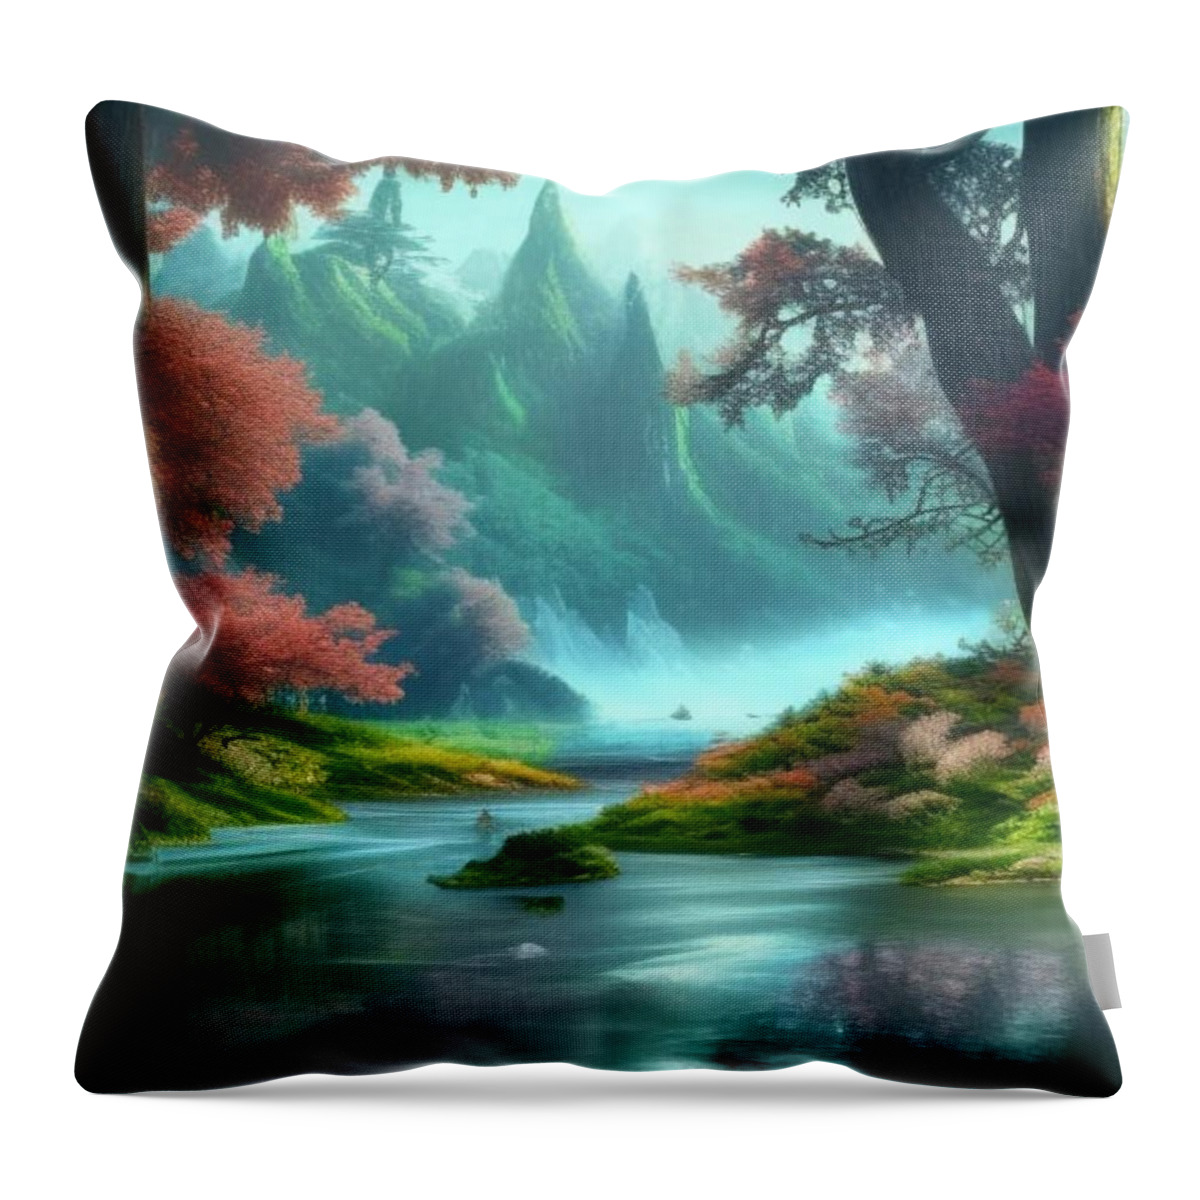 Lake Throw Pillow featuring the digital art Mystical Lake by Michael Galvin